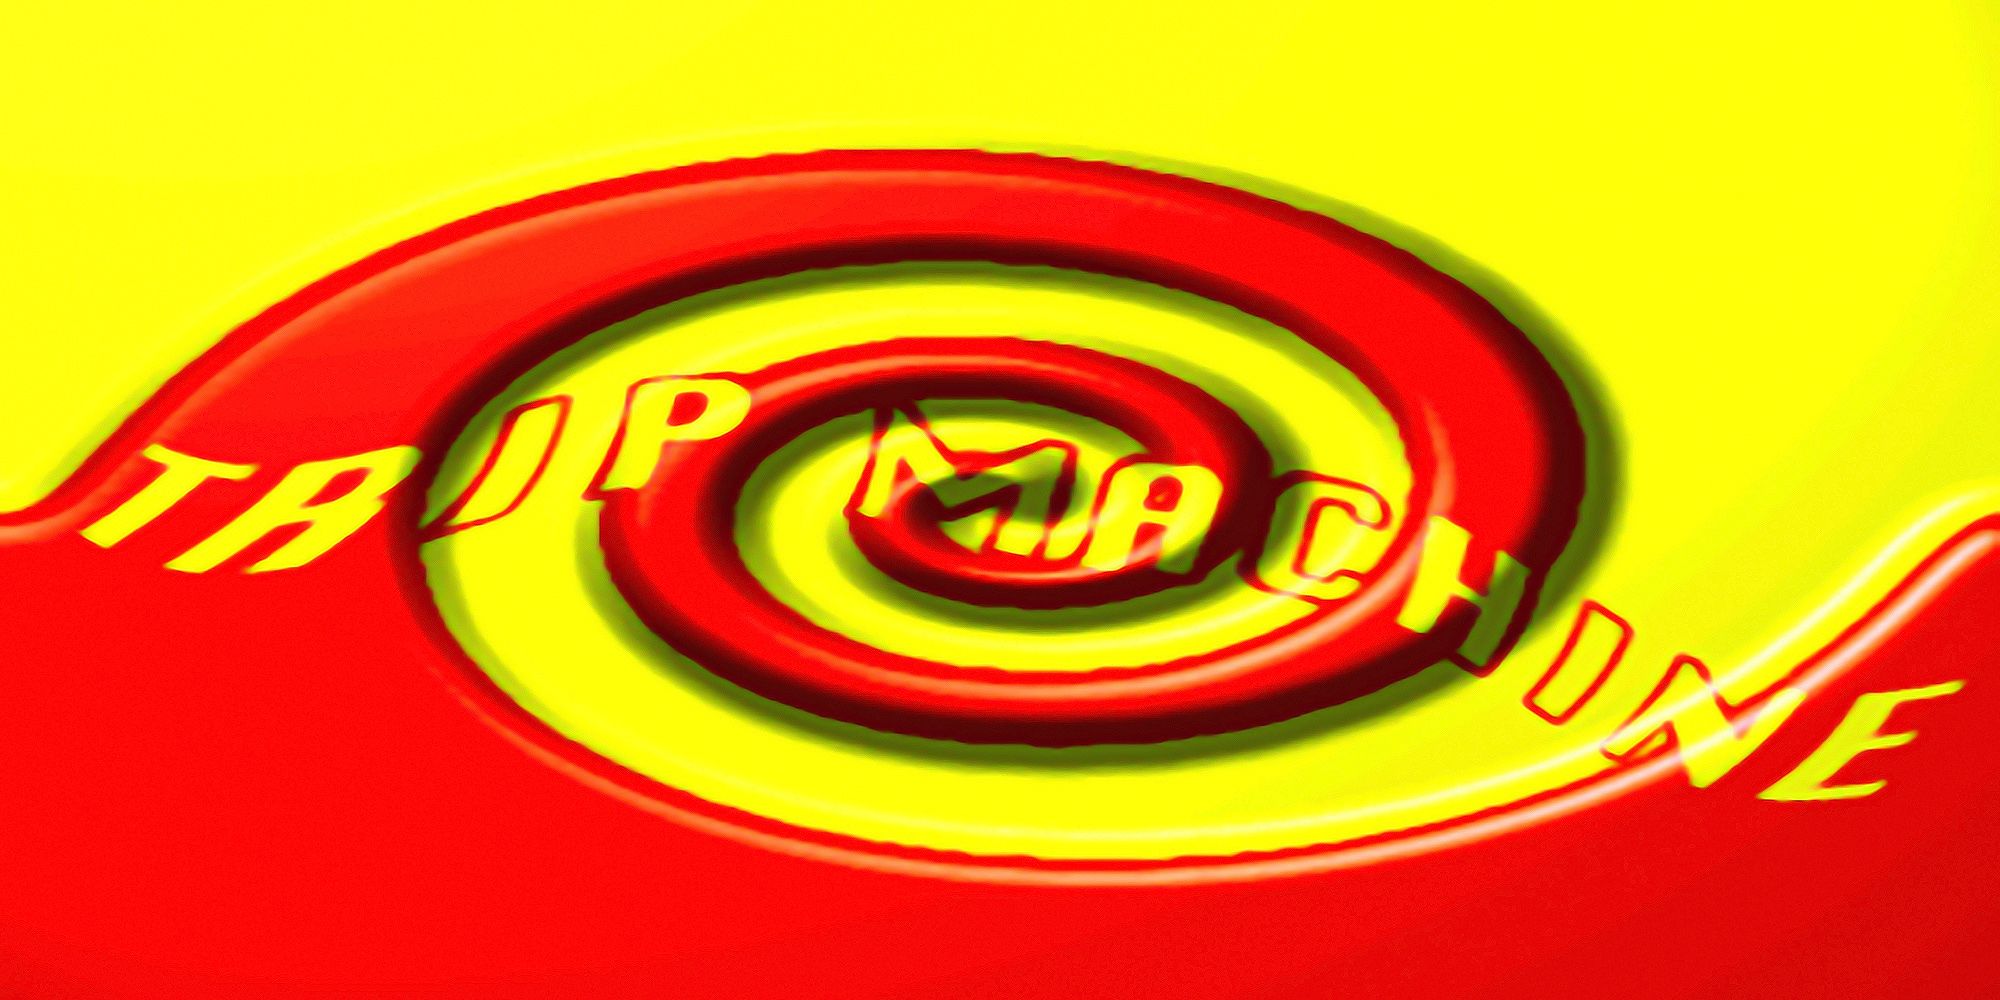 A trippy yellow and red background represents the track, Trip Machine, from the original Dance Dance Revolution.